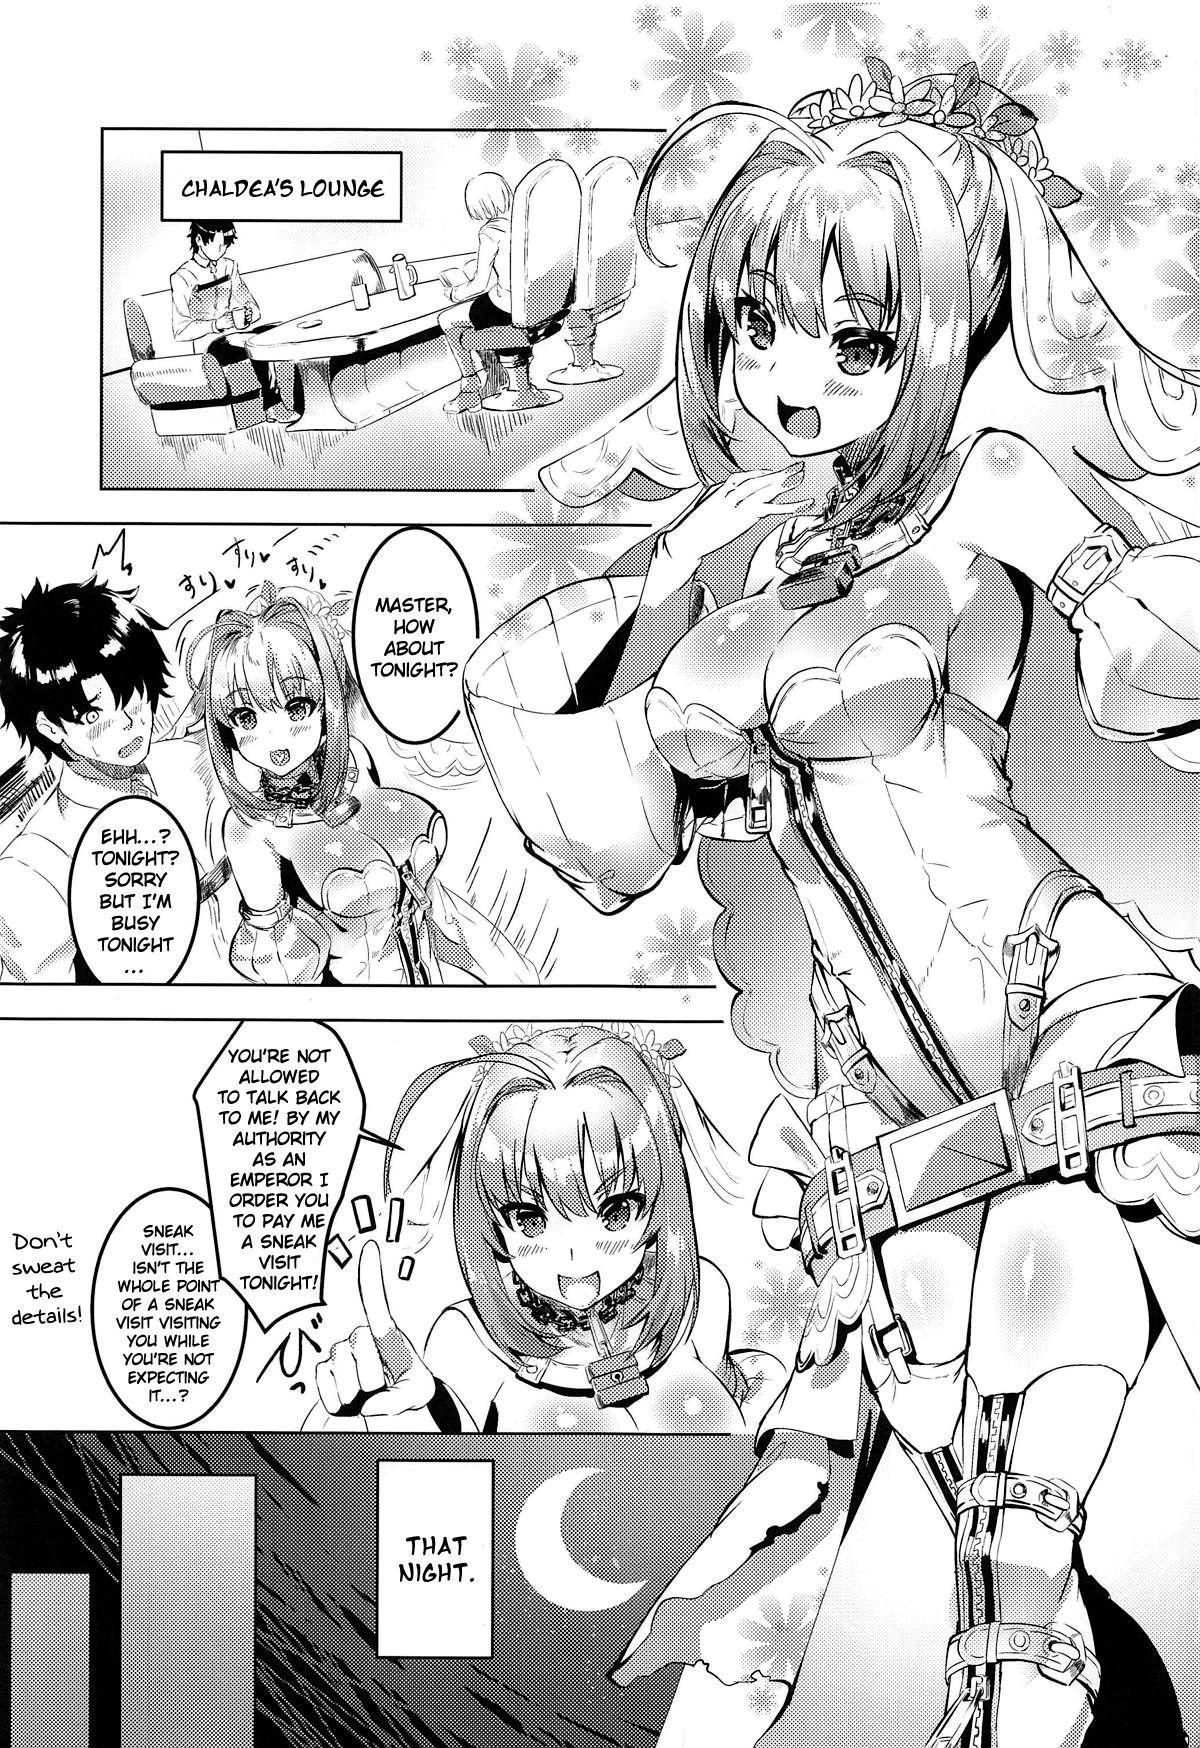 Chile Koutei to Oni no Erohon | An Ero Book About an Emperor and an Oni - Fate grand order Calle - Page 2